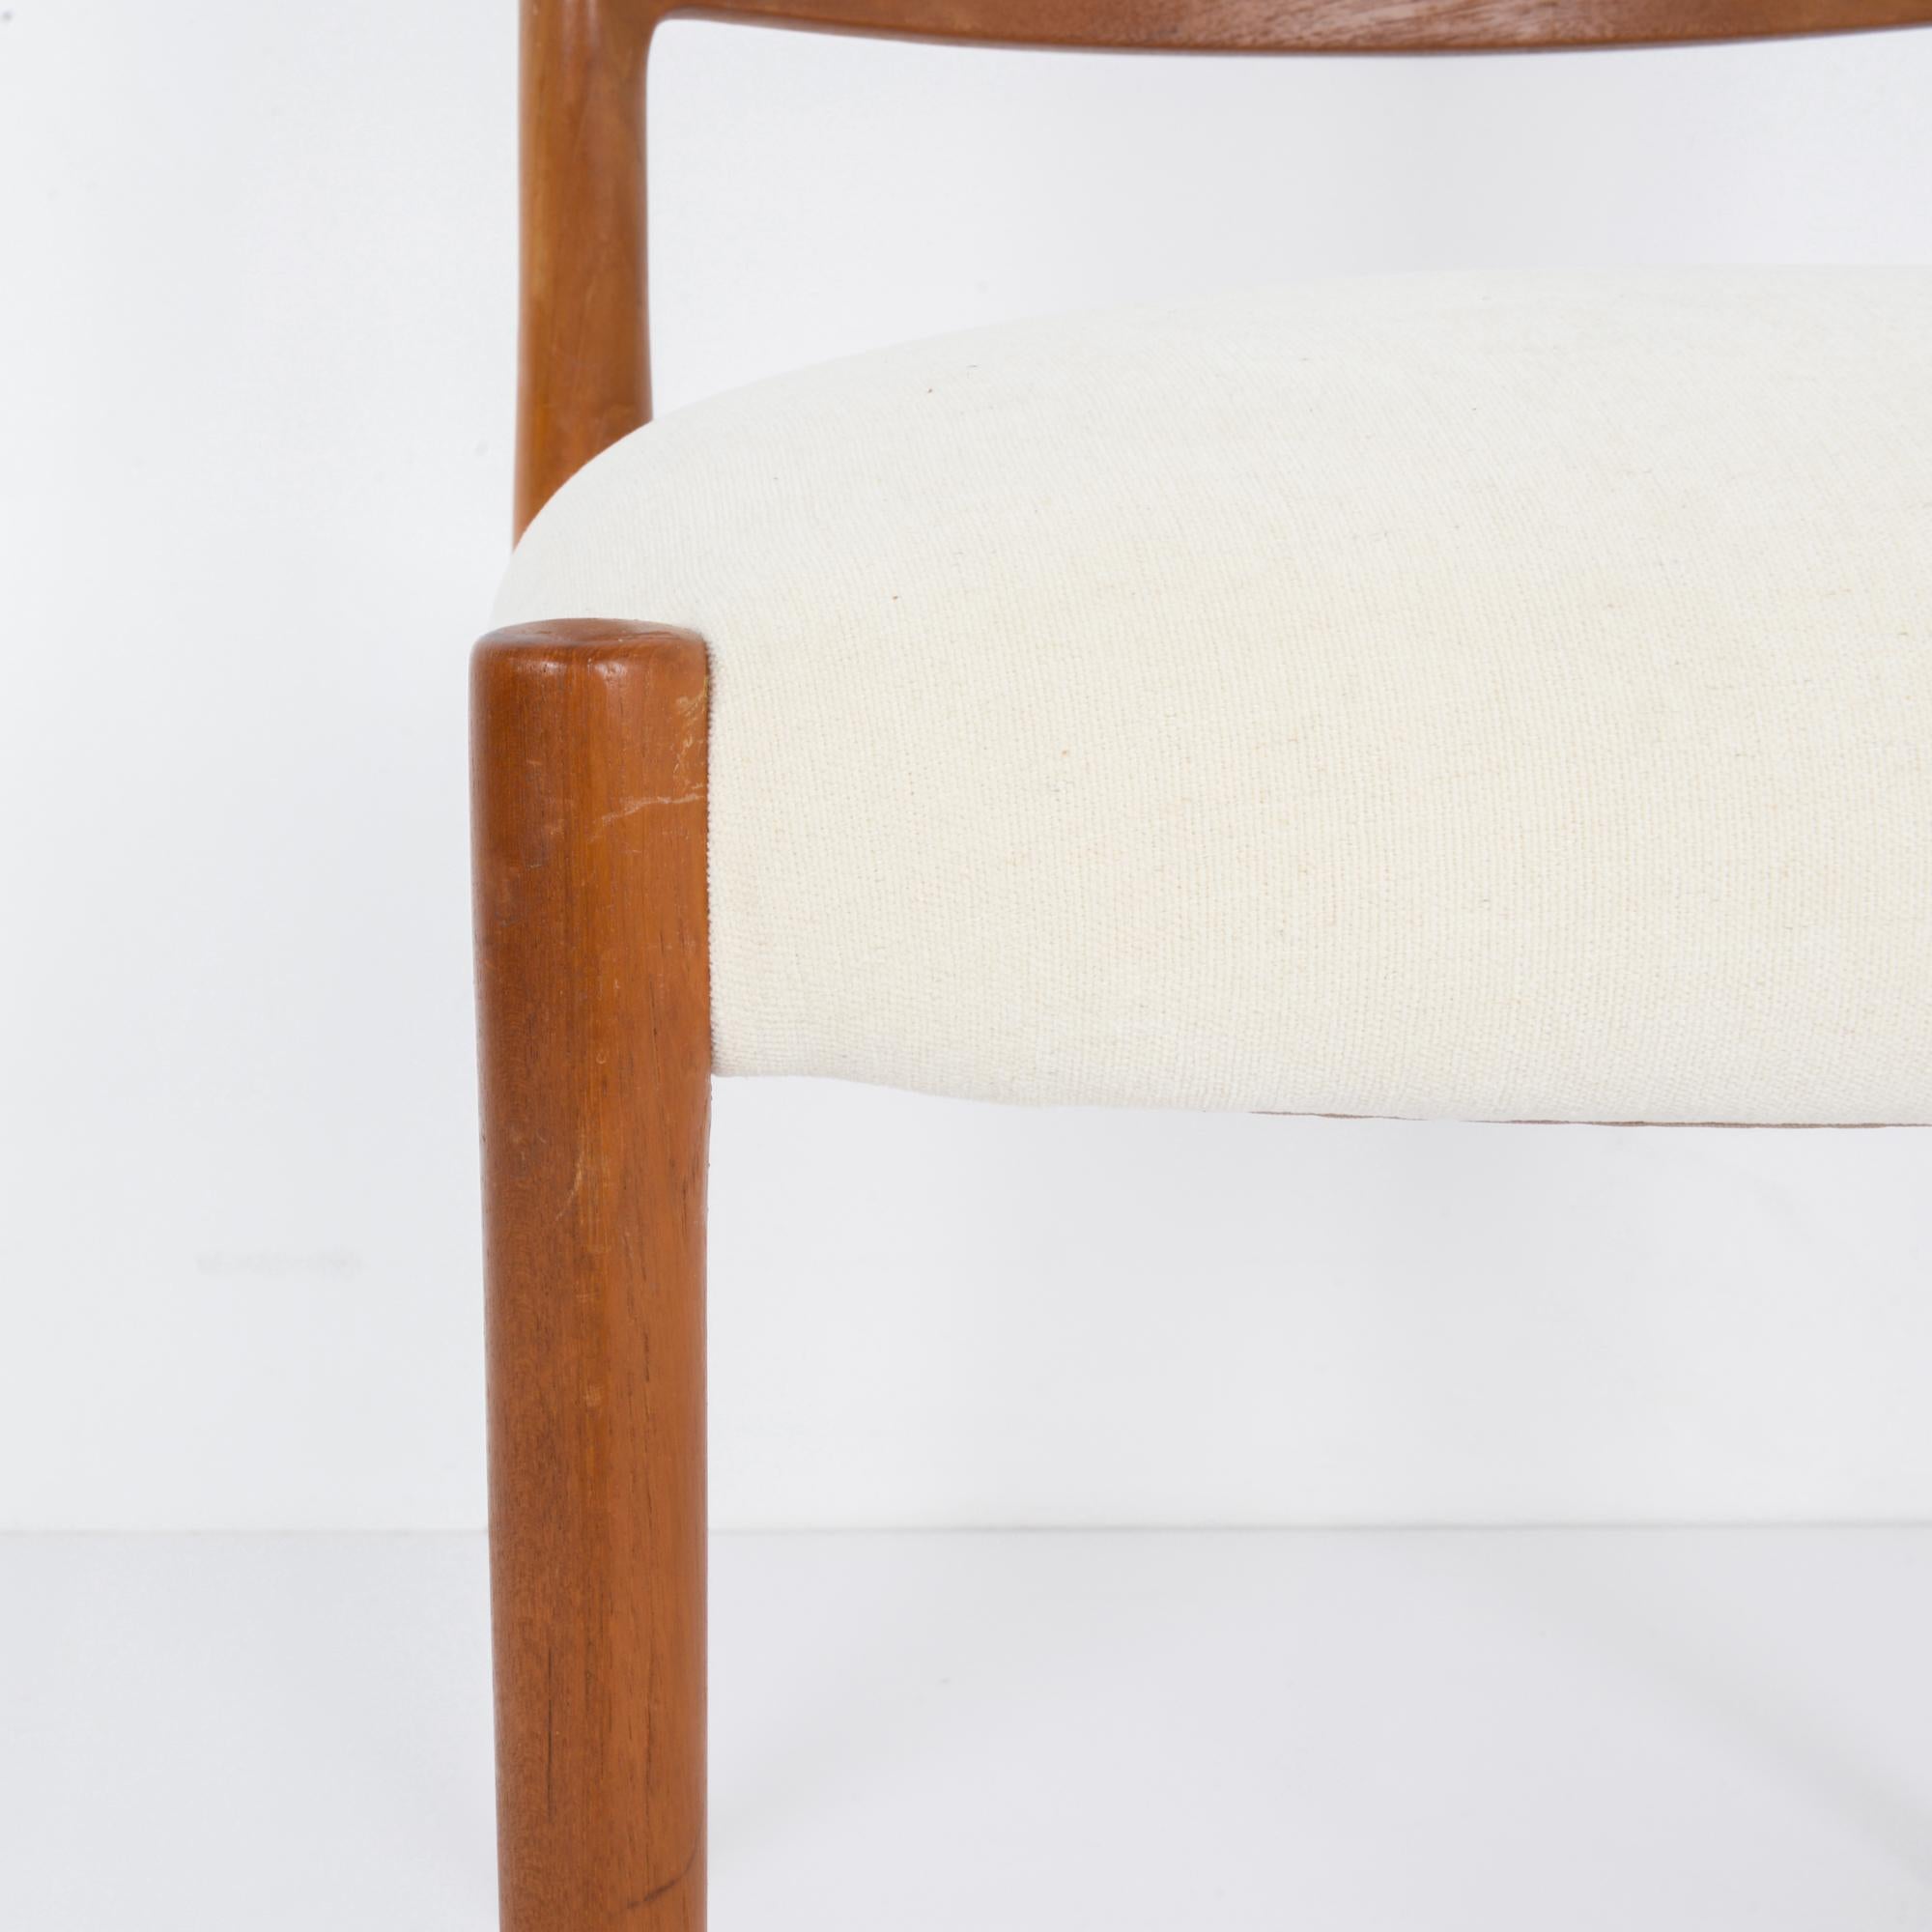 1960s Danish Wooden Chair with Upholstered Seat For Sale 2